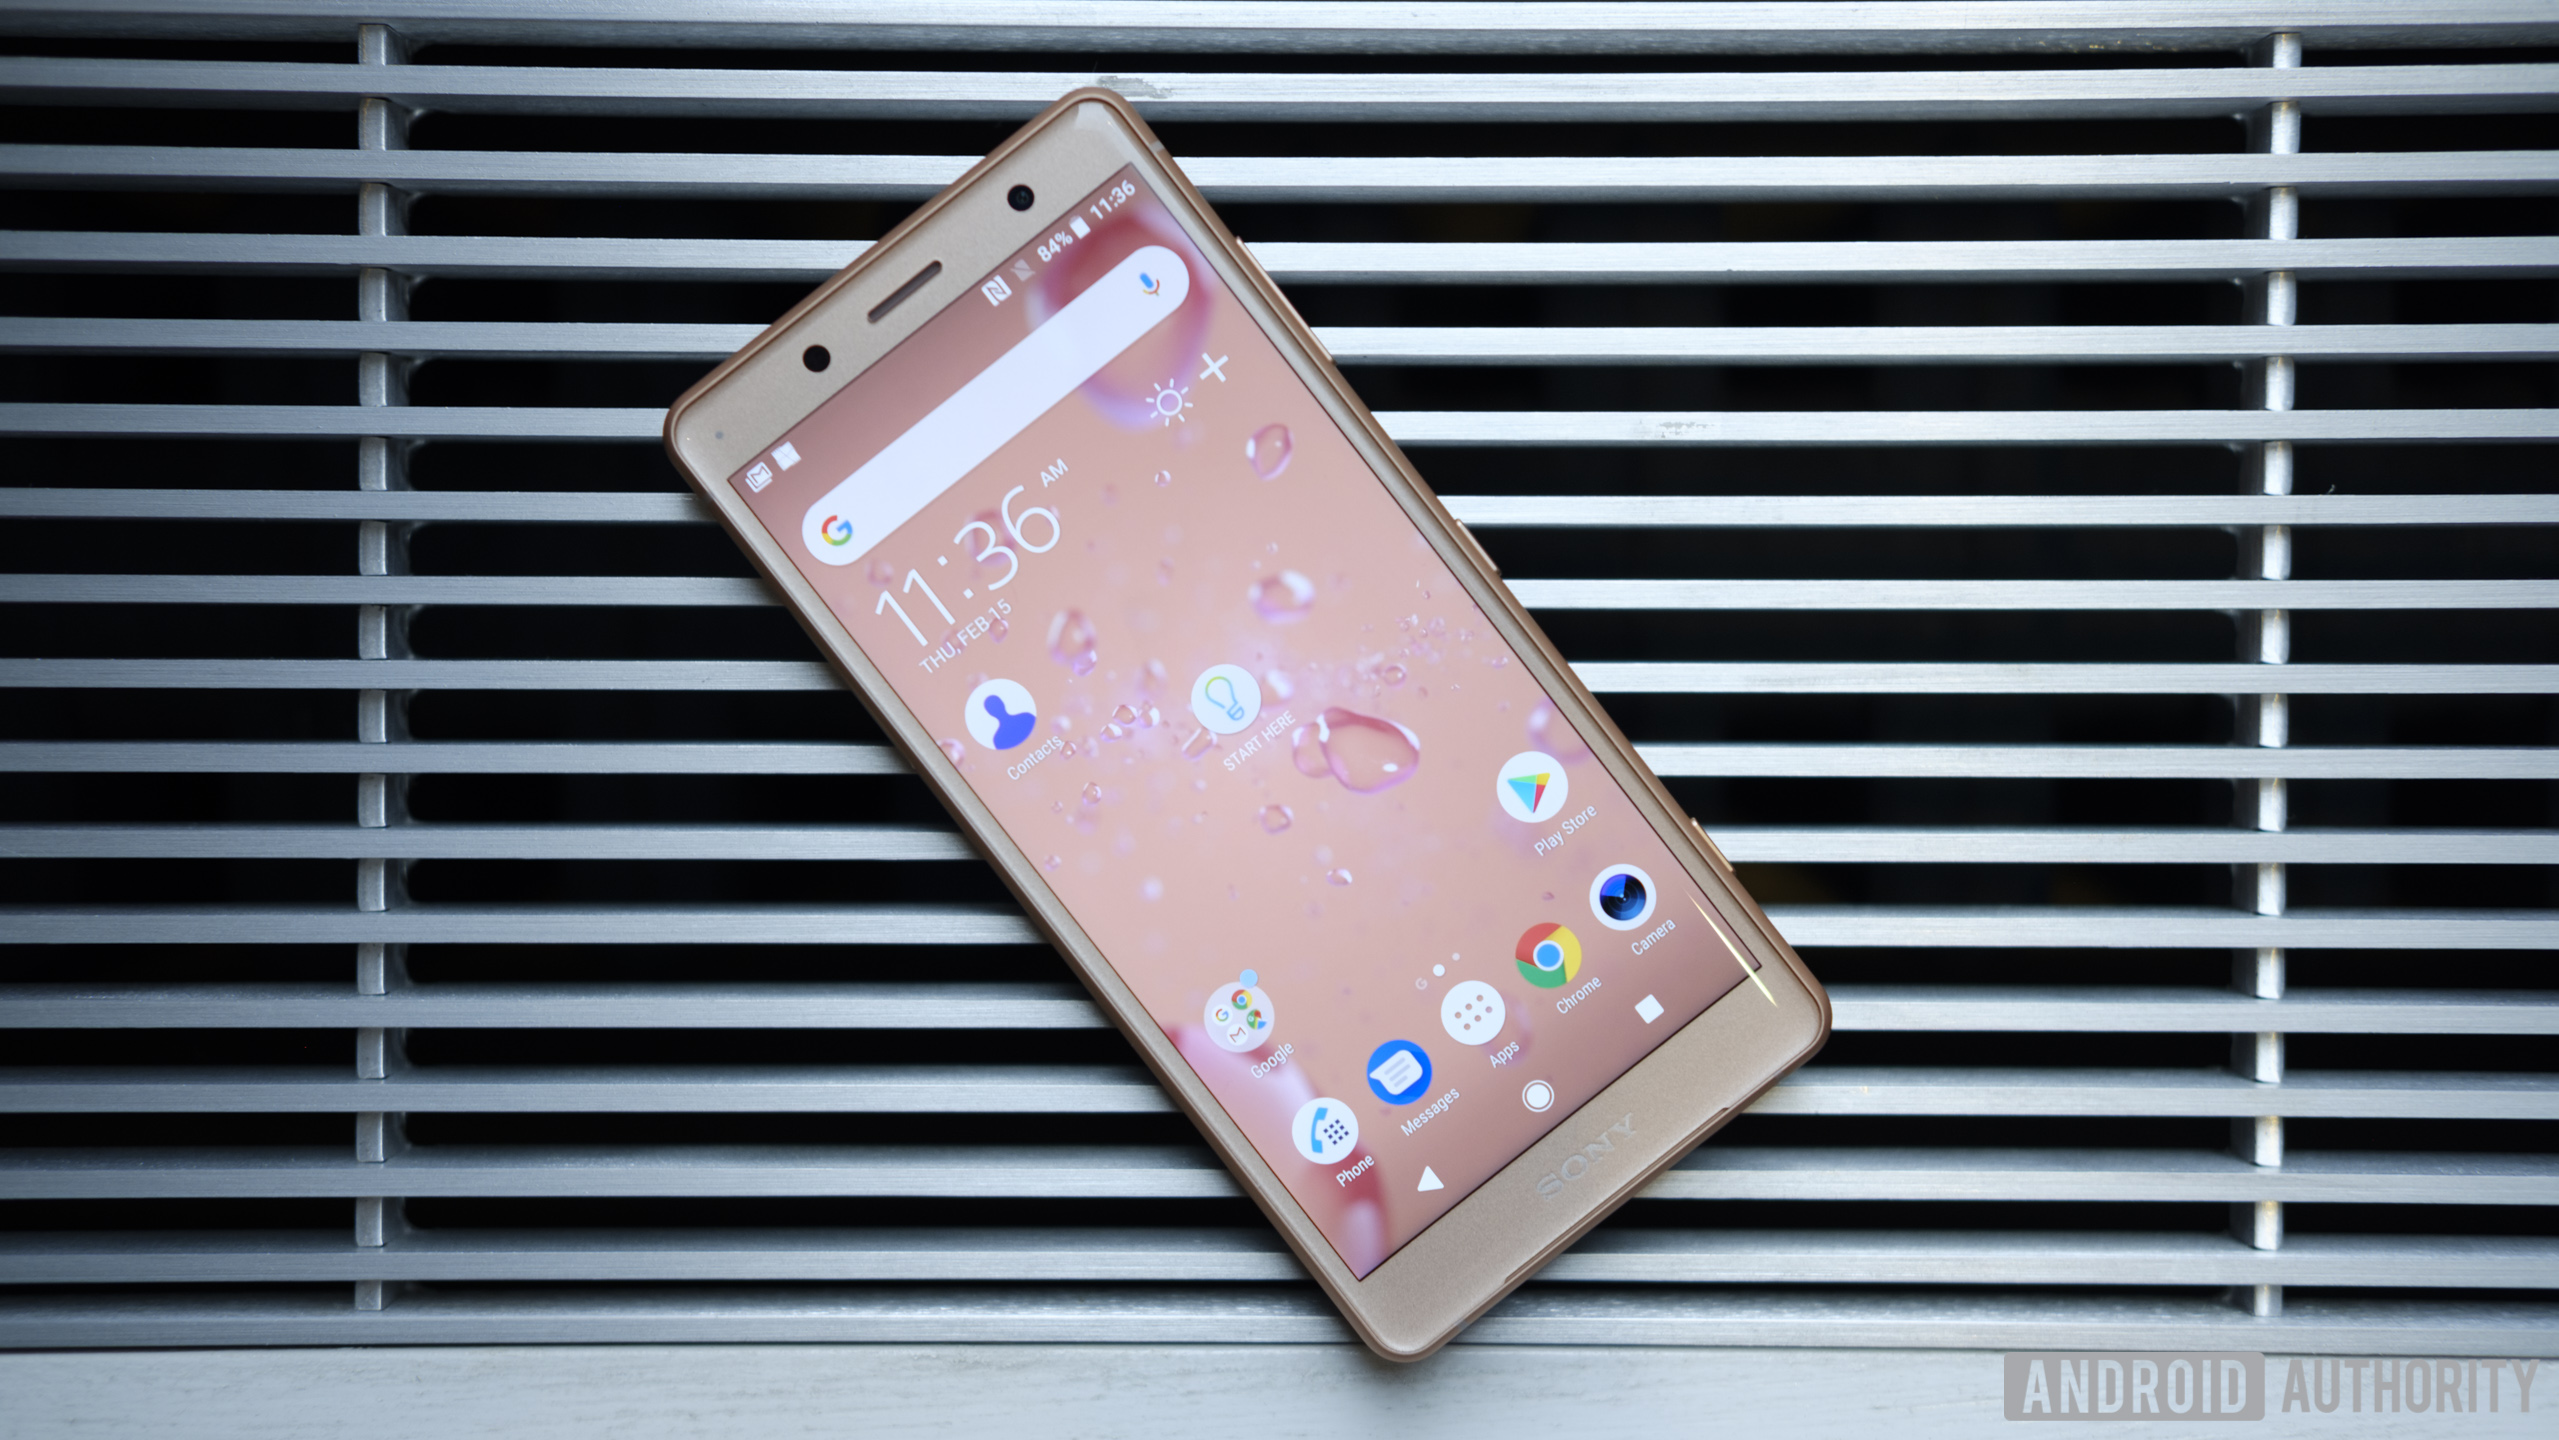 Sony Xperia XZ2 review: Making a buzz - Android Authority